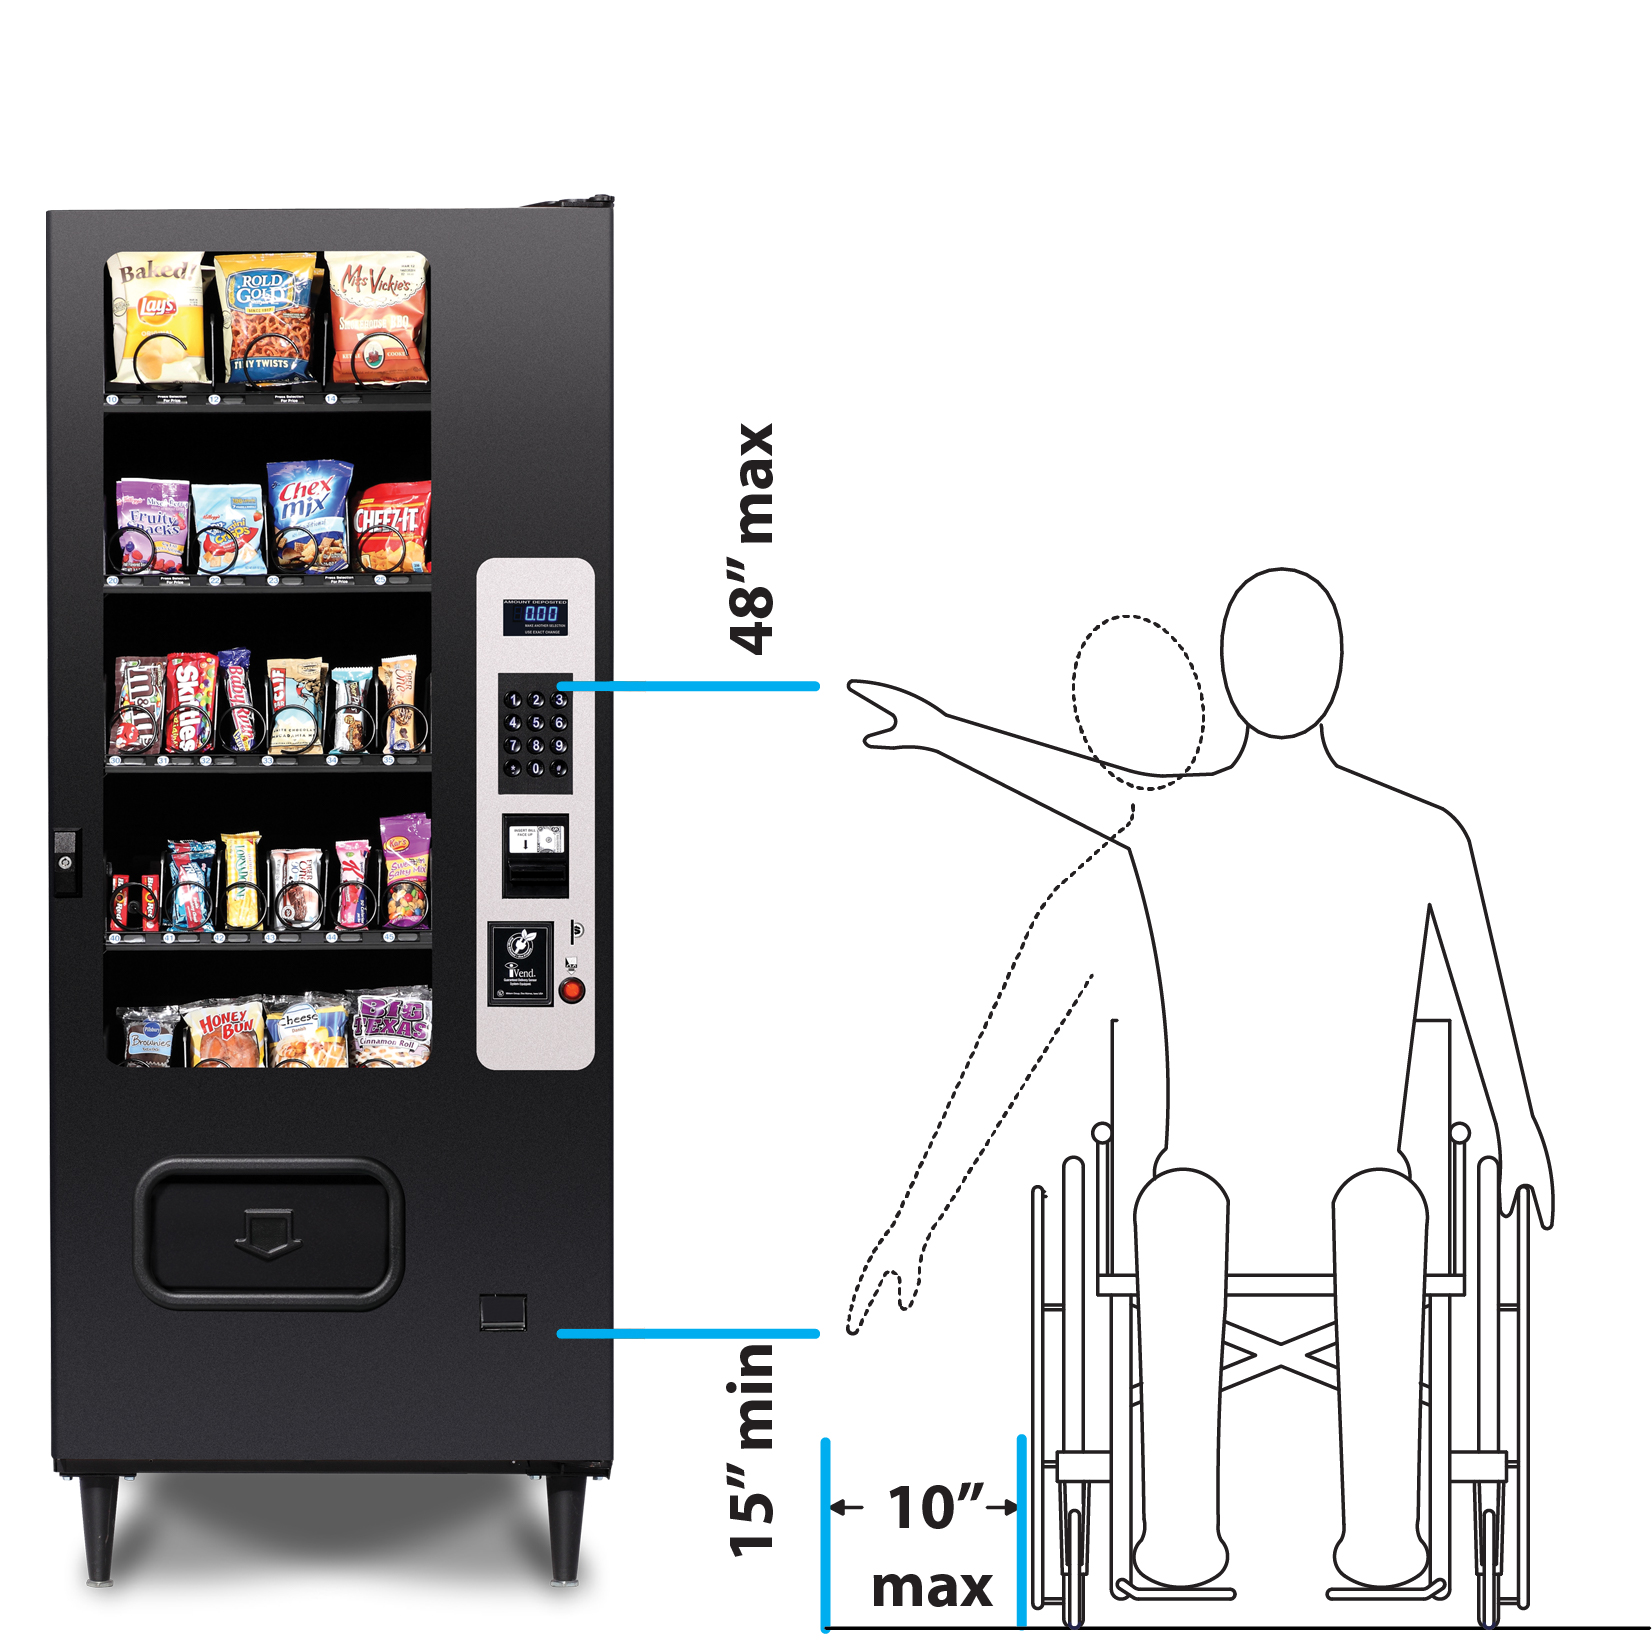 Many vending machines from Selectivend are ADA complaint, making them simple for everyone to use.